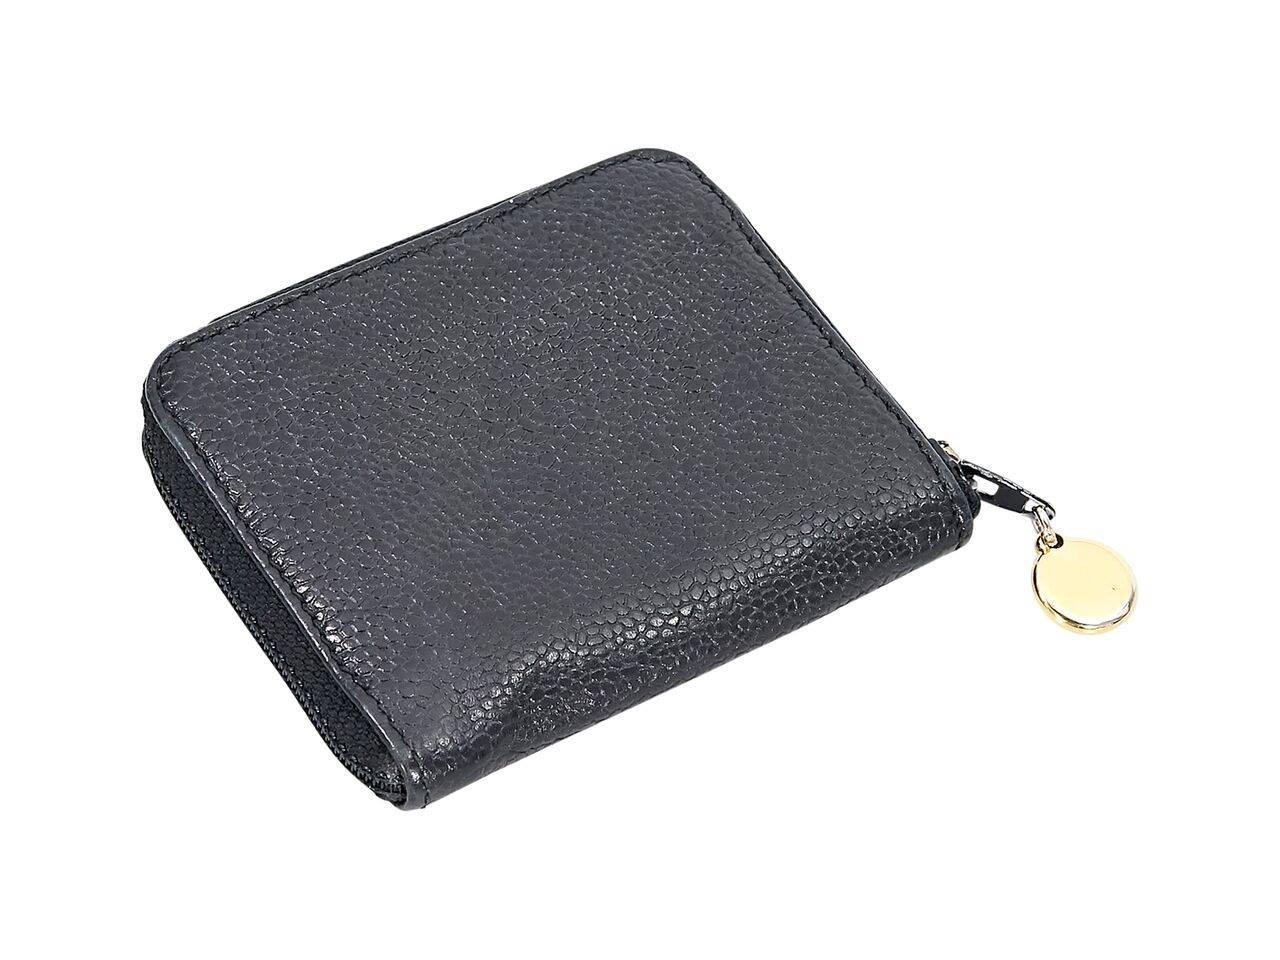 Product details:  Black caviar leather timeless wallet by Chanel.  Front embossed logo.  Zip around closure.  Lined interior with two inner compartments.  4